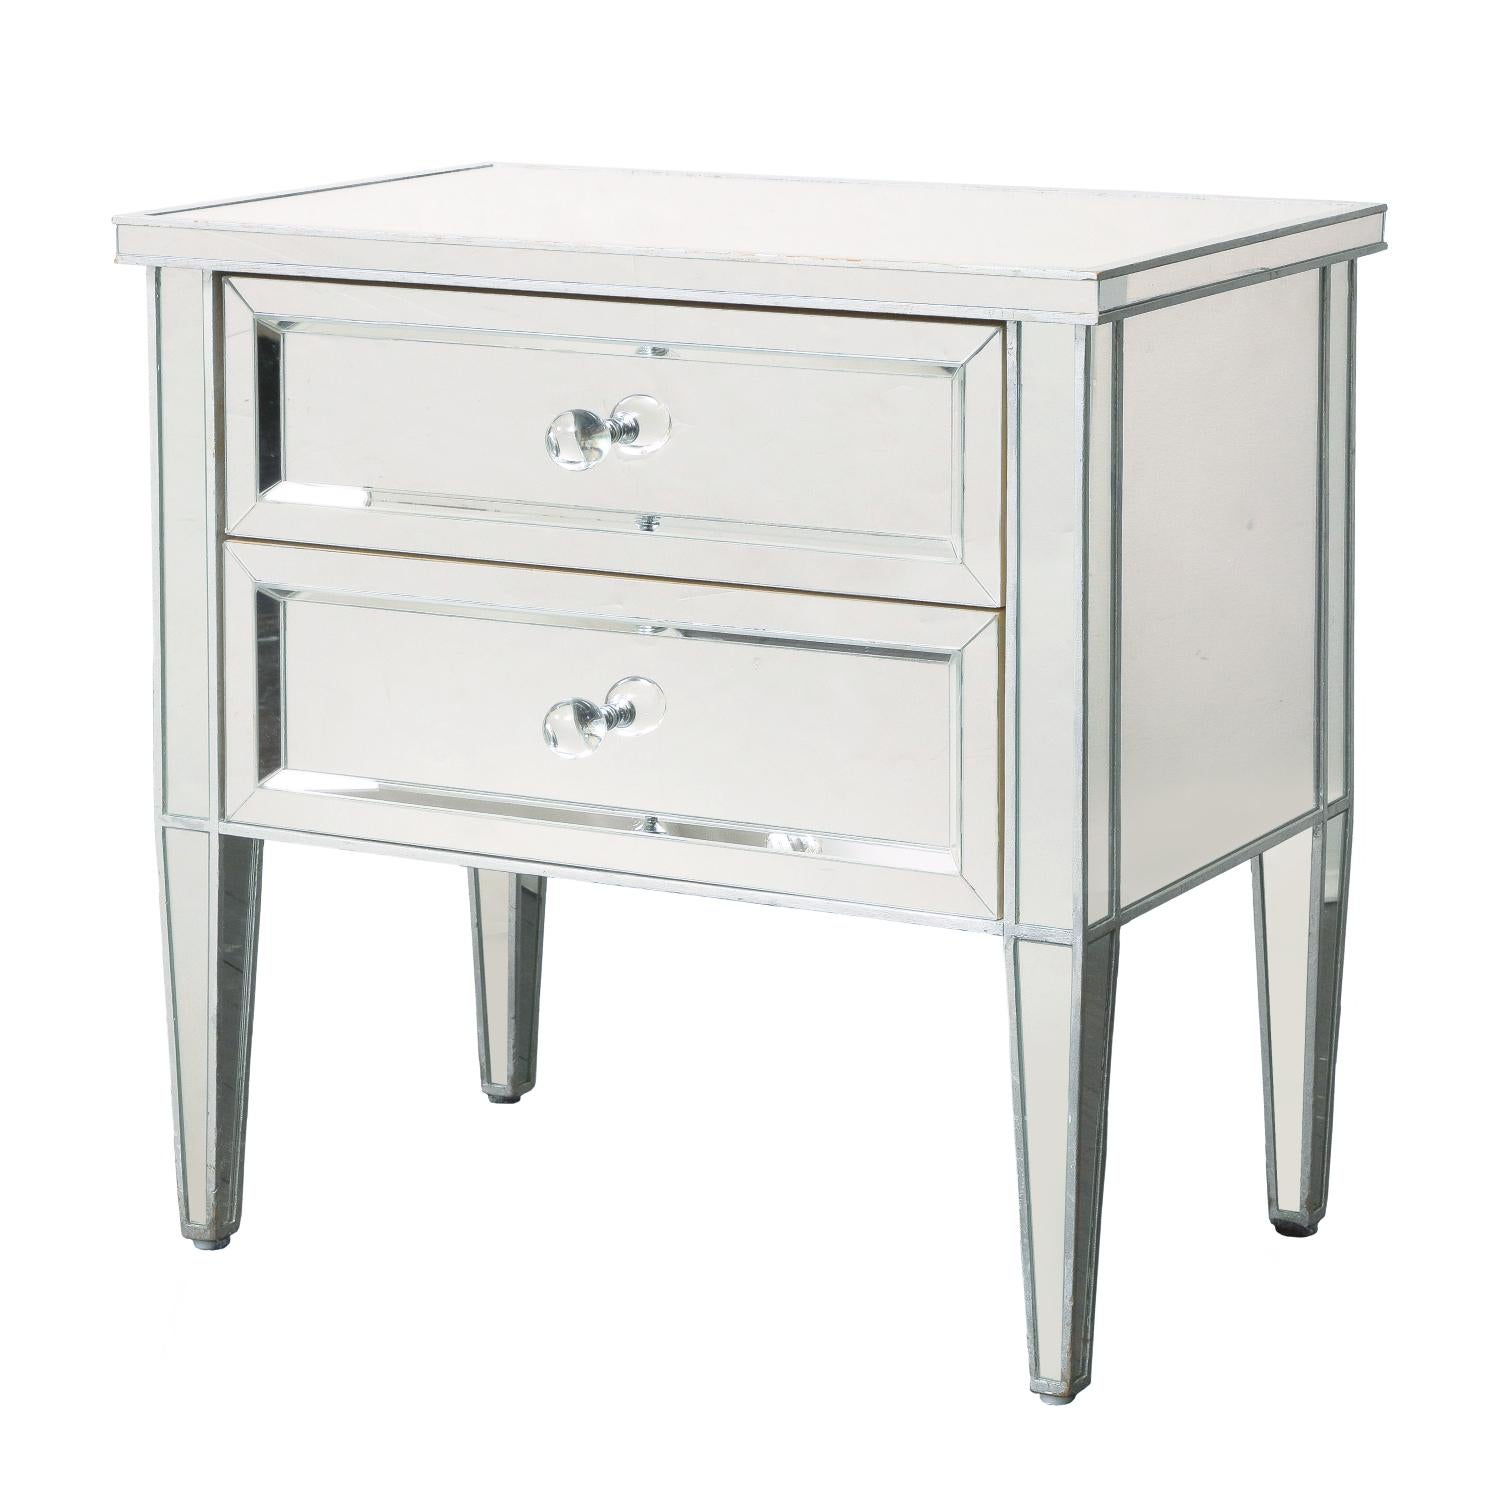 Chic pair of Neoclassical style mirrored nightstands with painted silver trim and crystal ball knobs. All drawers are 19